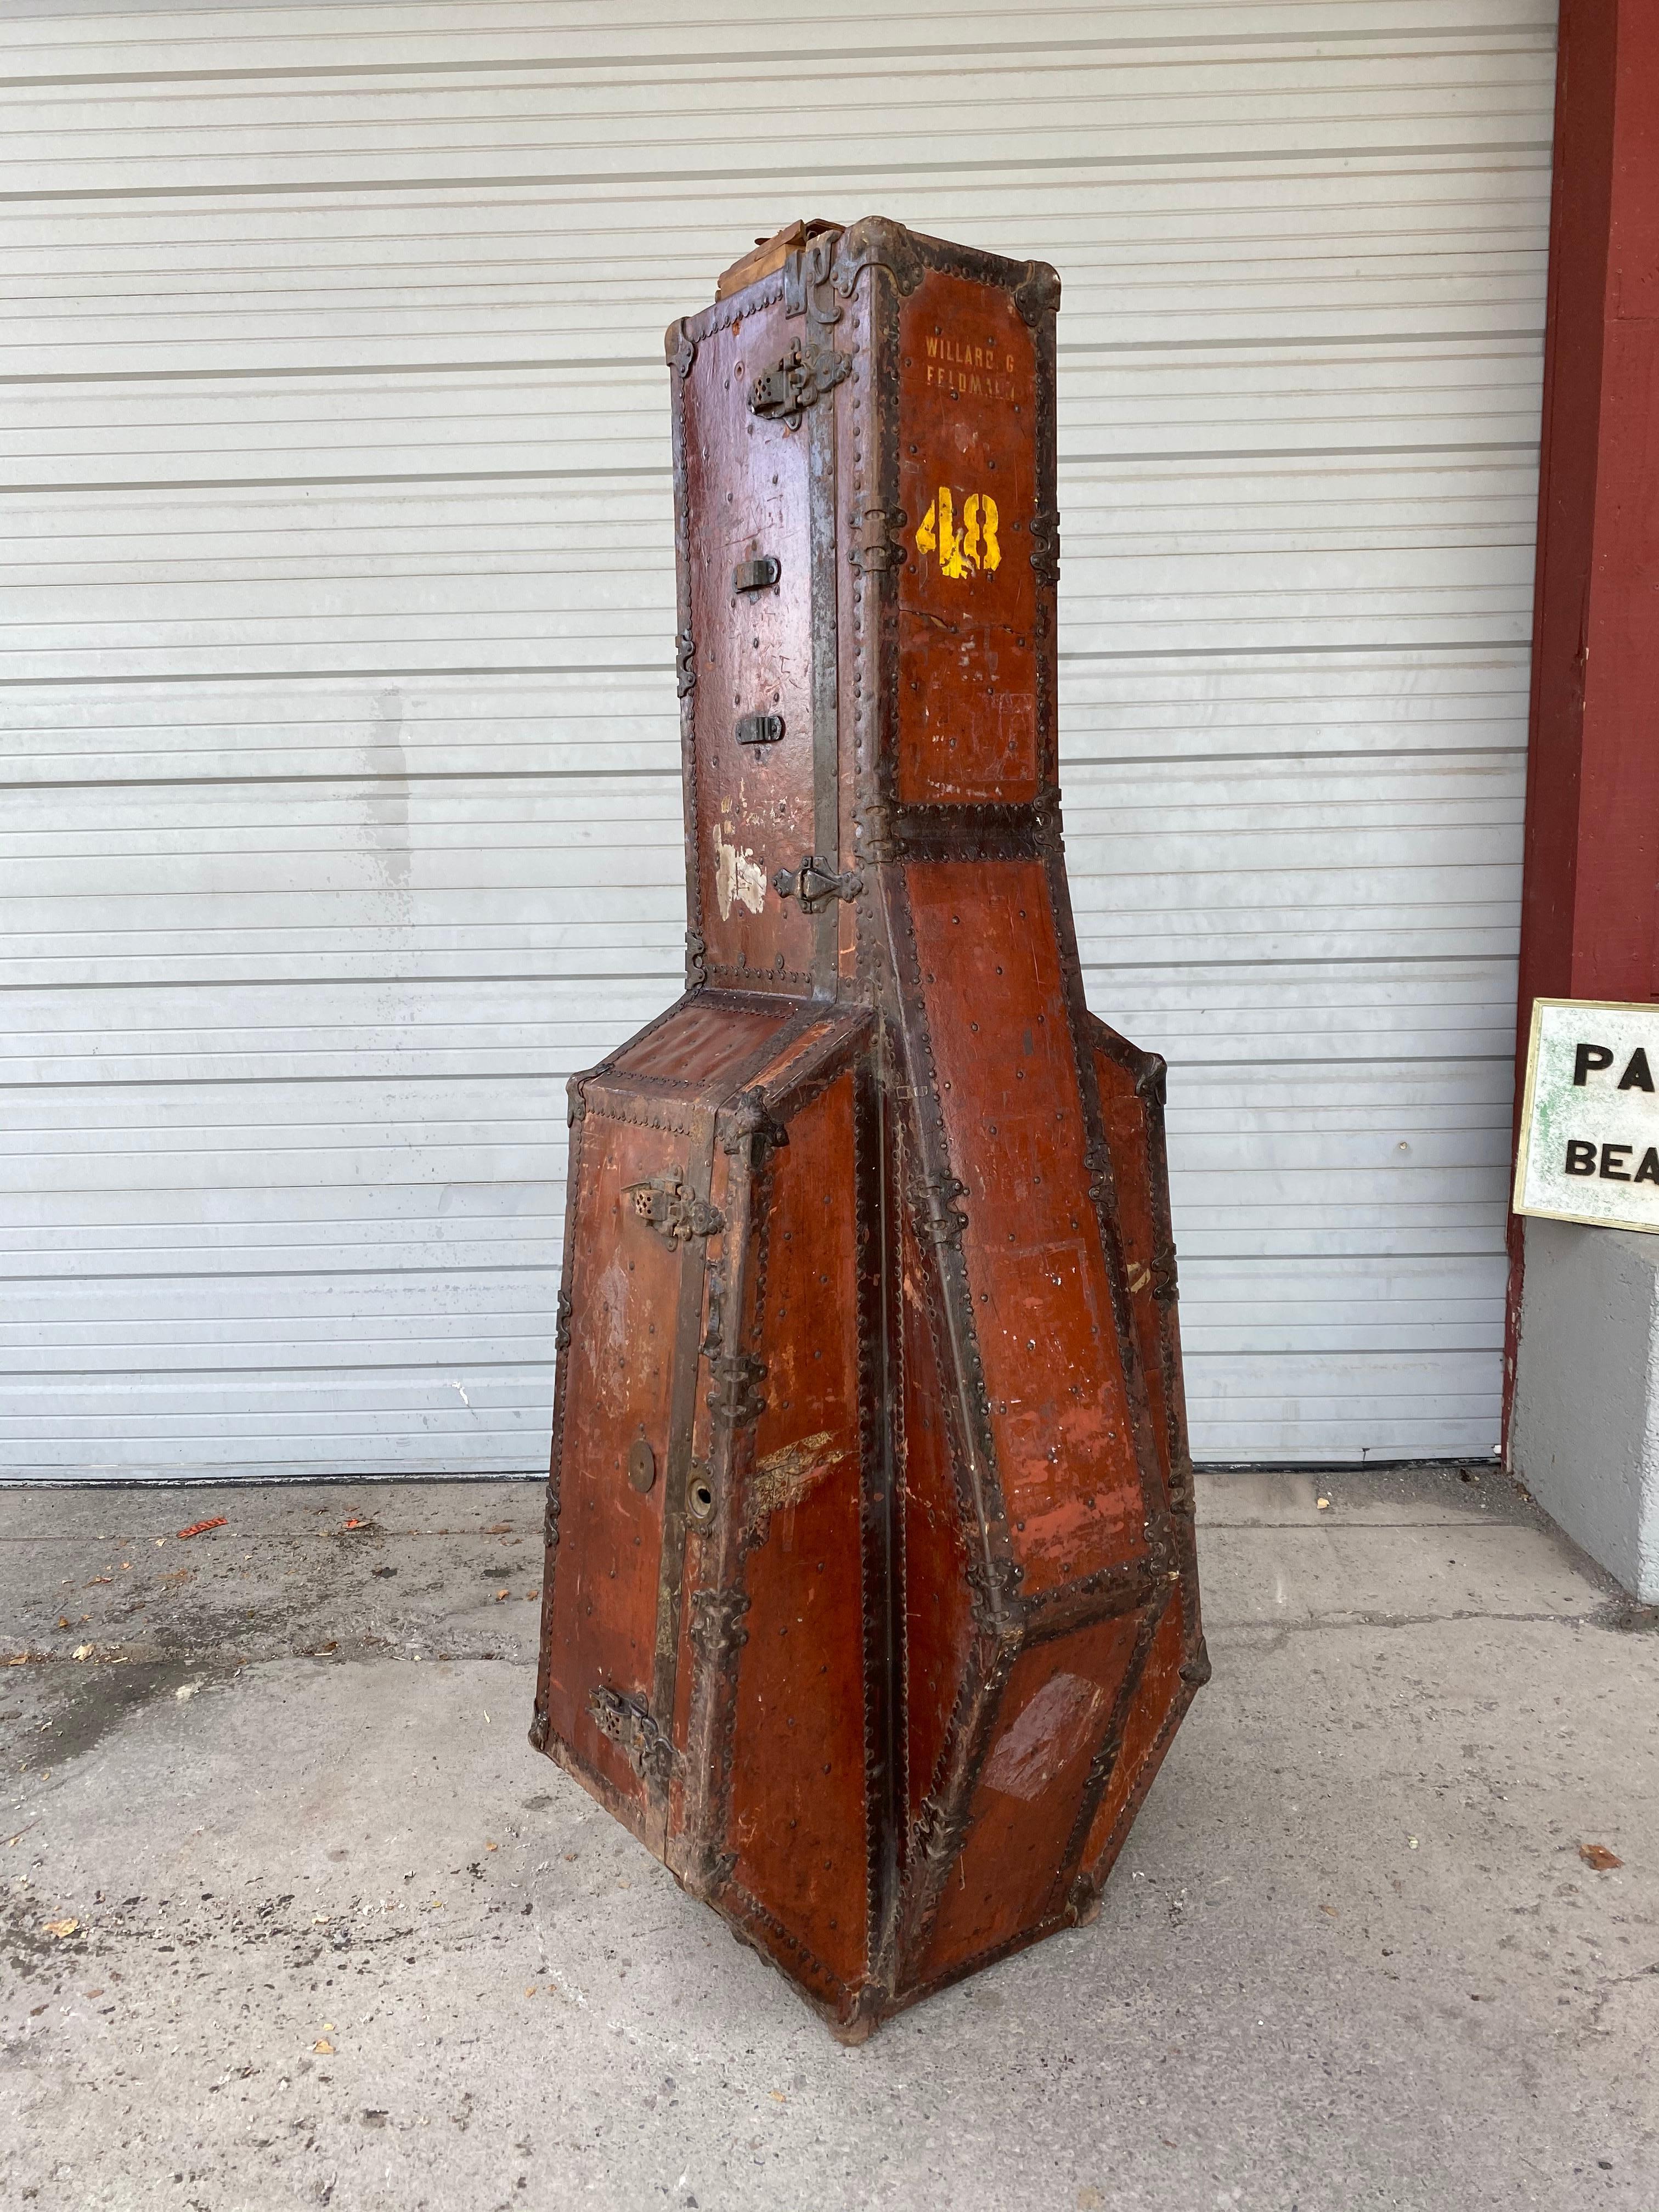 Unusual double bass shipping trunk / case, manufactured by Central Factory Trunk, Simons & Co, Phila. Amazing cubist design, stunning hardware, detailing, retains original finish. Patina, wear consistent with age and use, also retains original